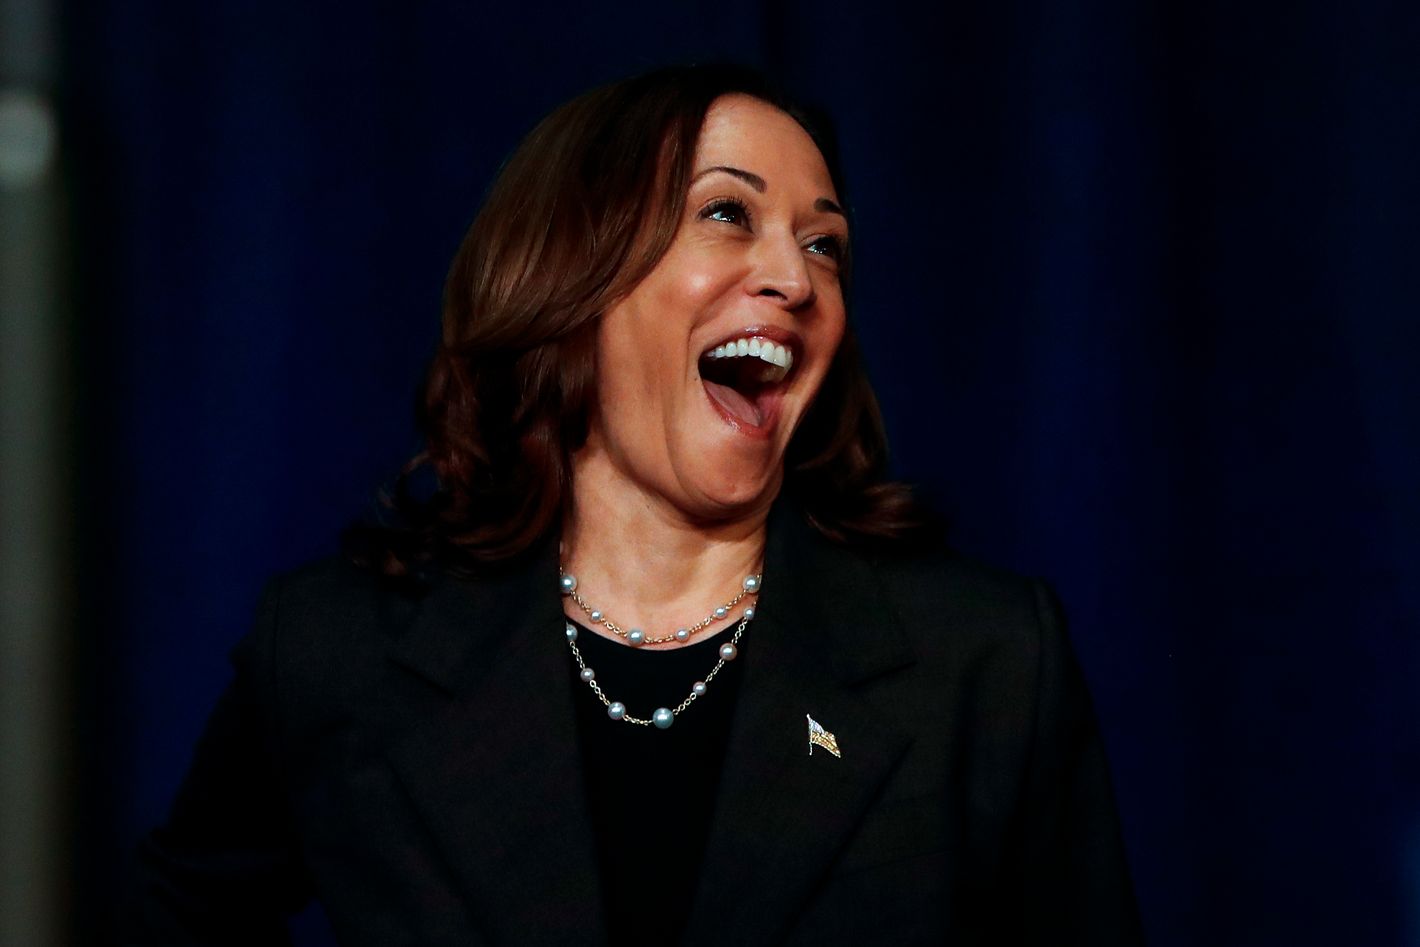 Why Are People Mixing Kamala Harris’s Laugh Into Pop Songs?